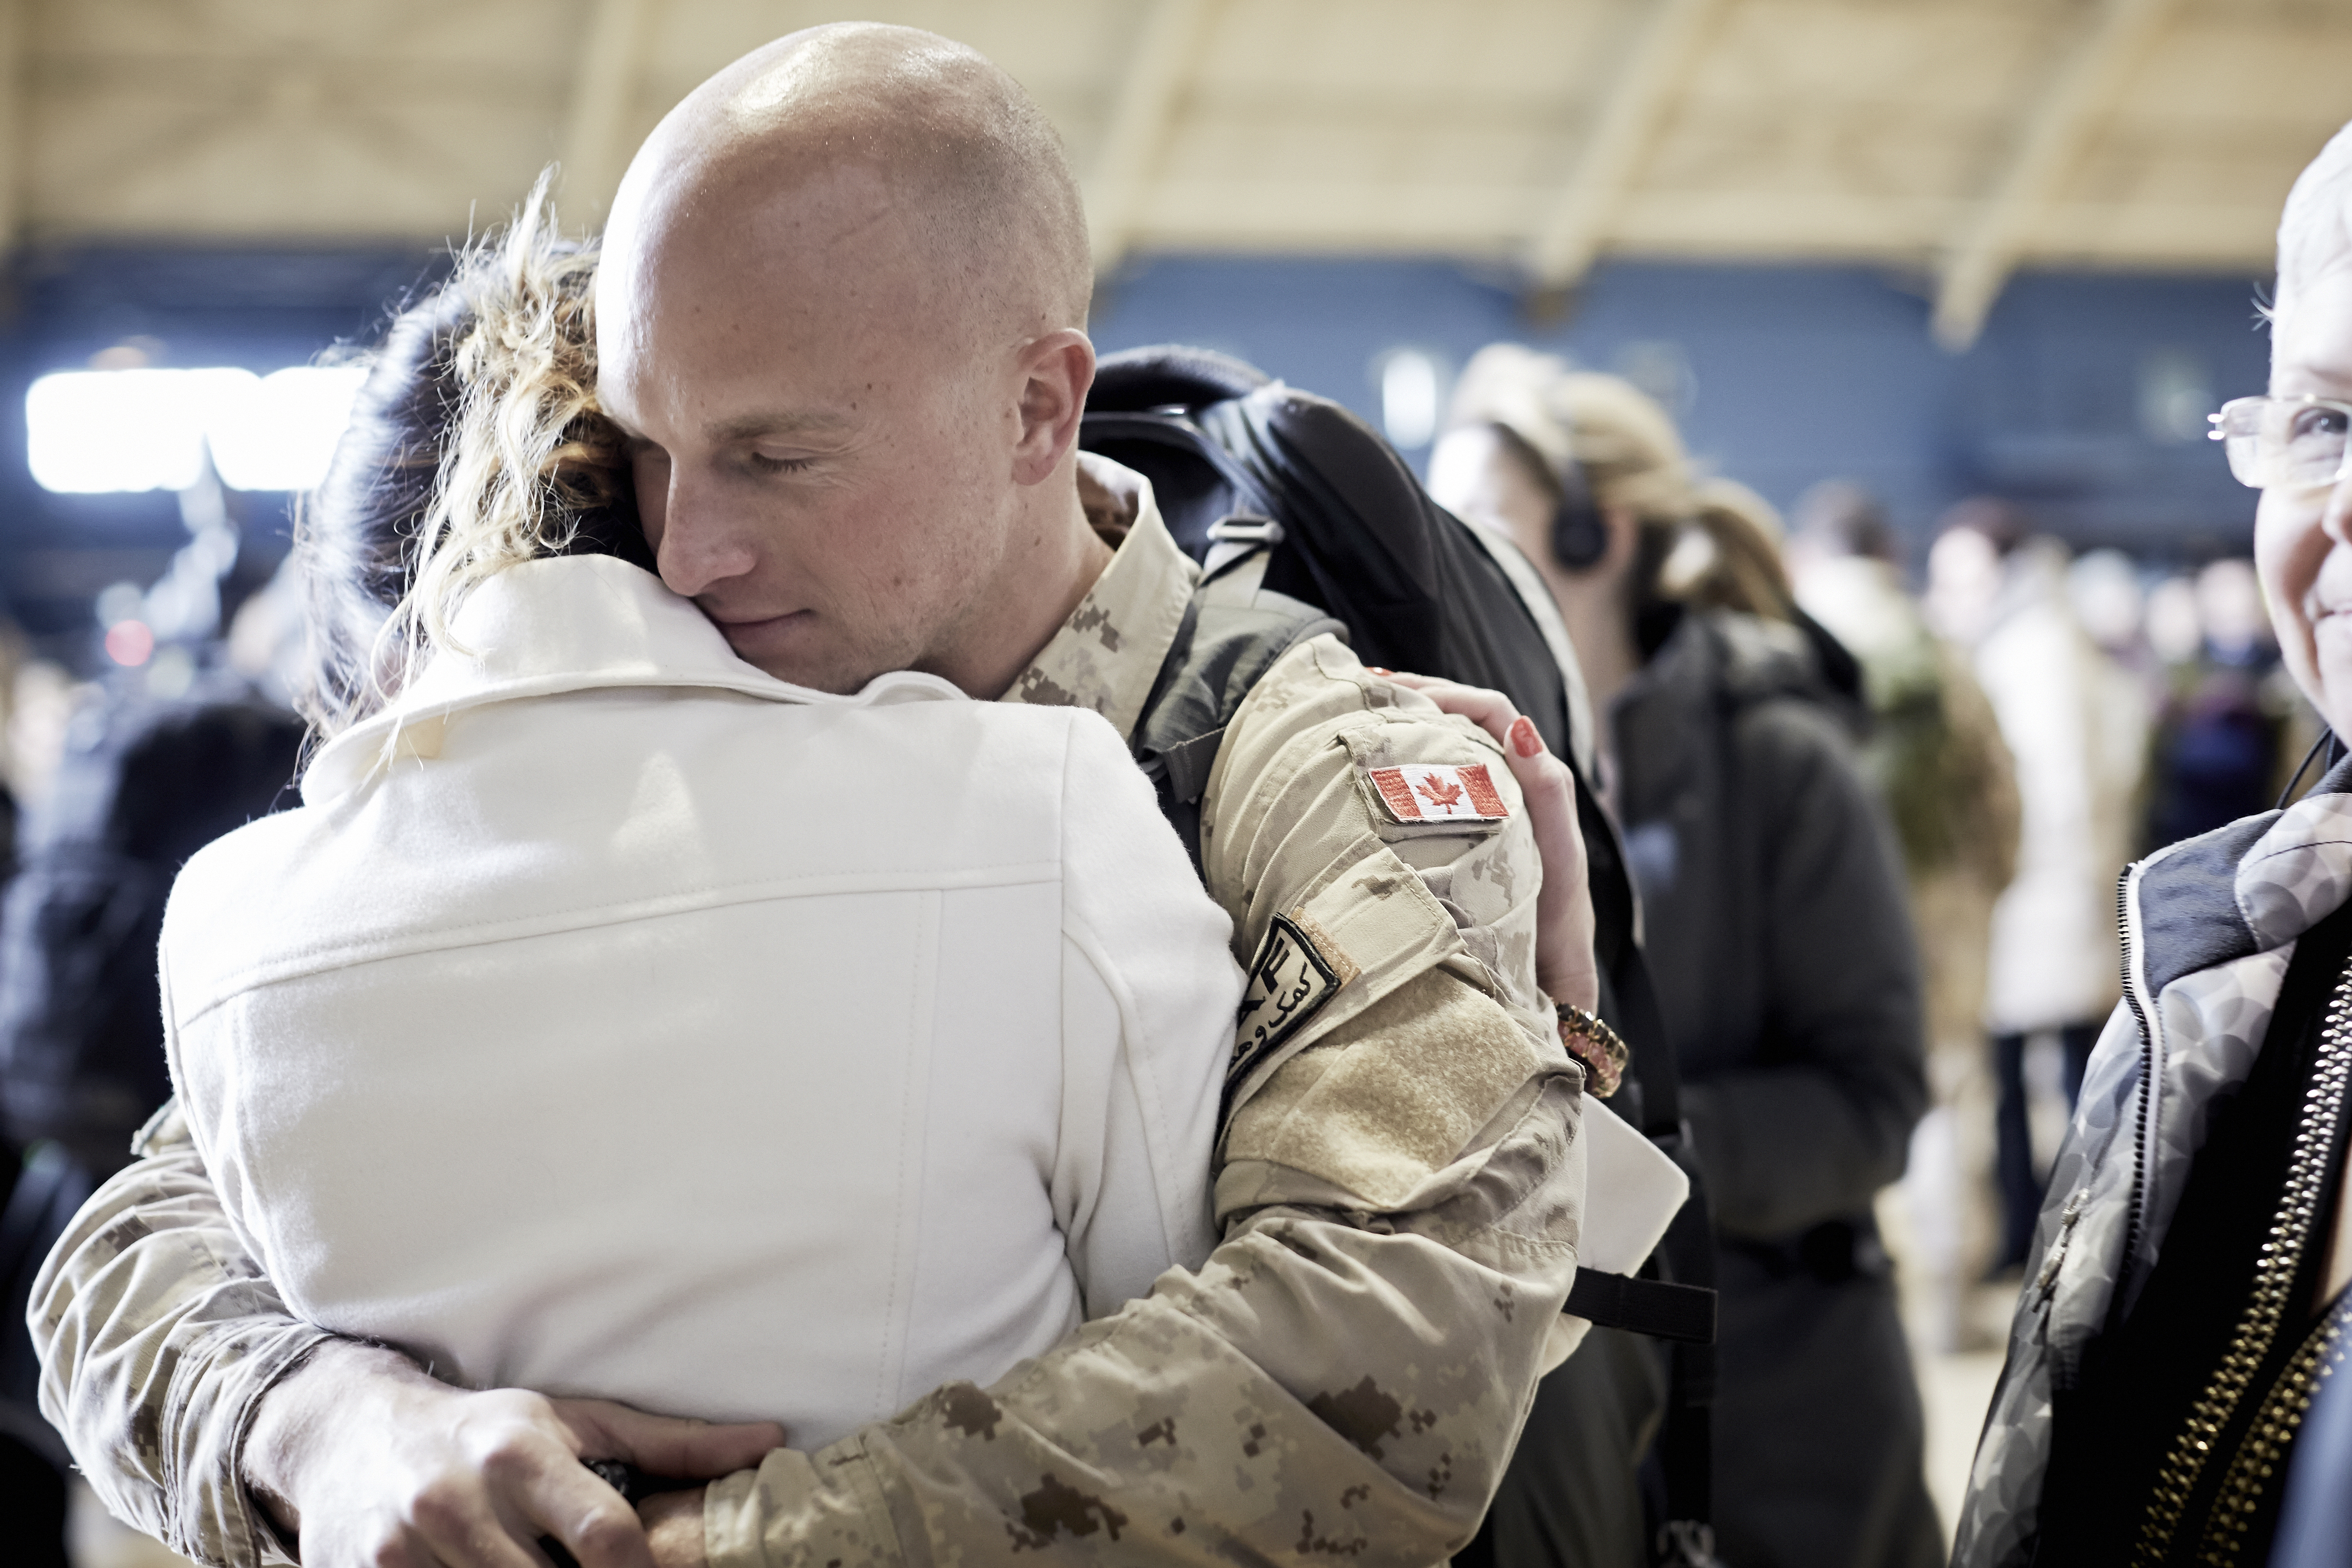 Extra help can assist military members, Veterans and their families in life-changing ways